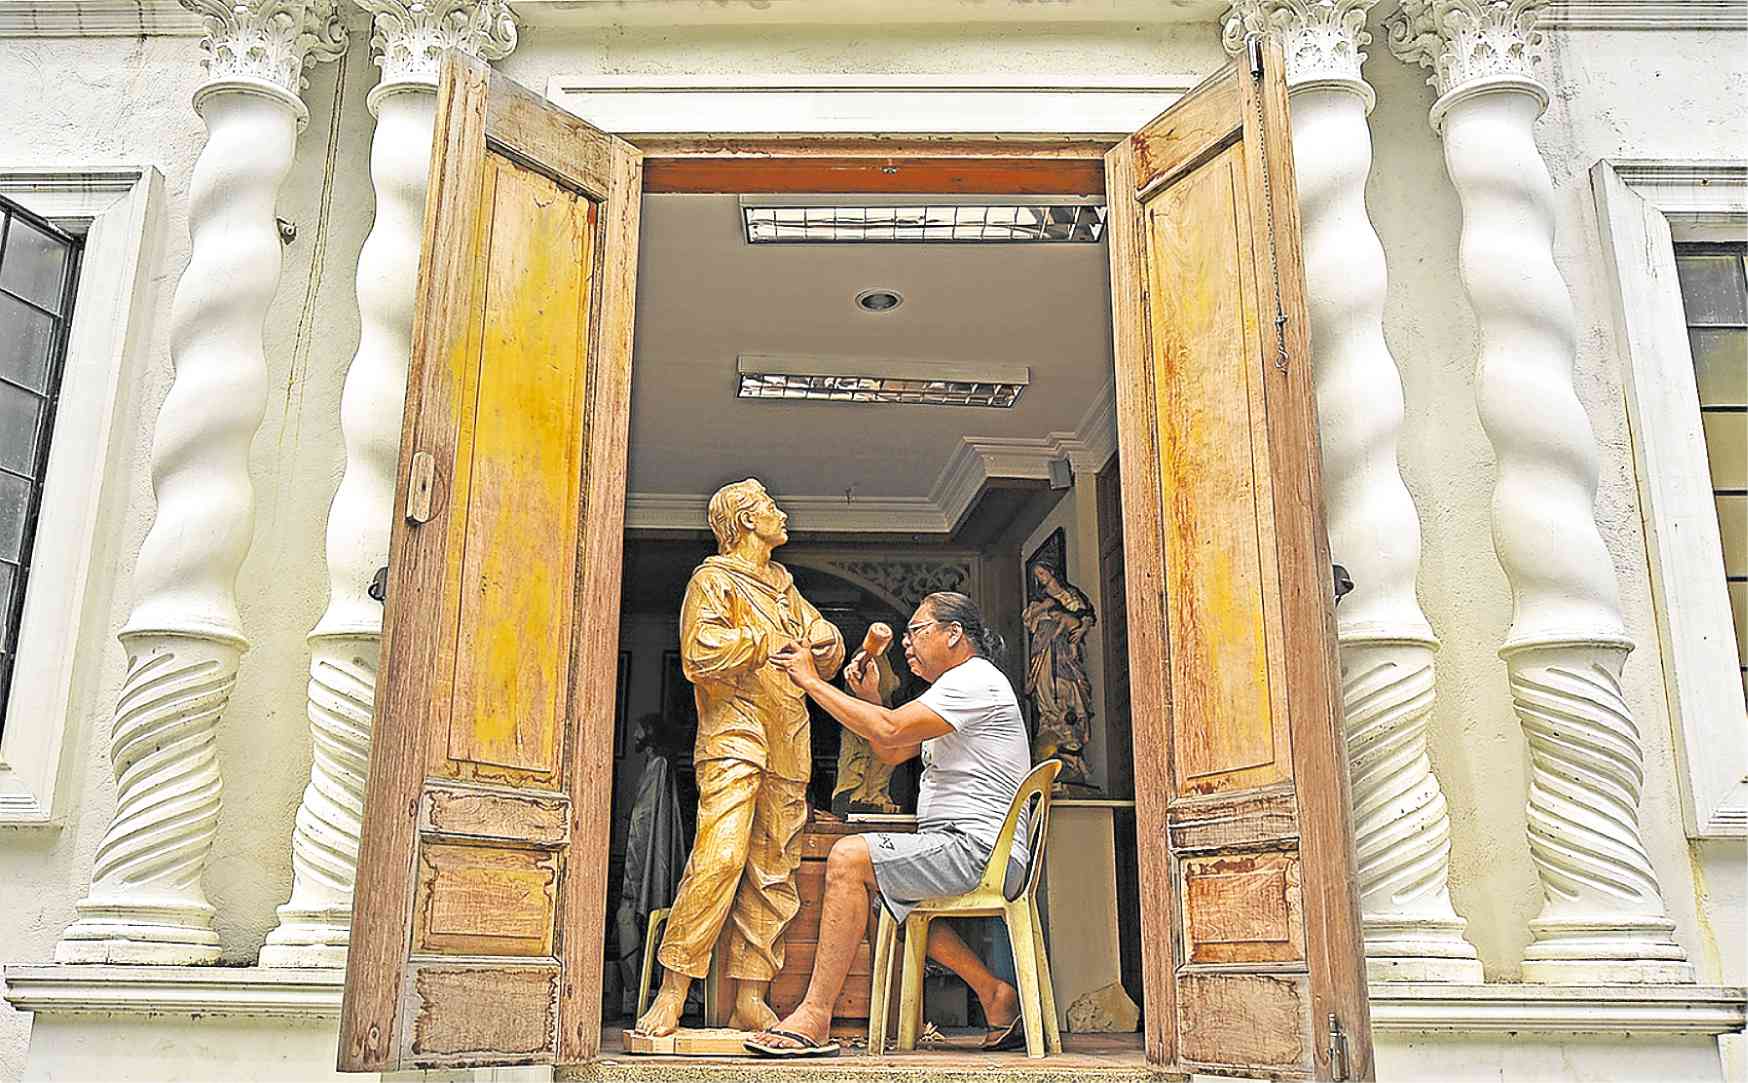 Layug’s sculptures lead to ‘sacred encounters’